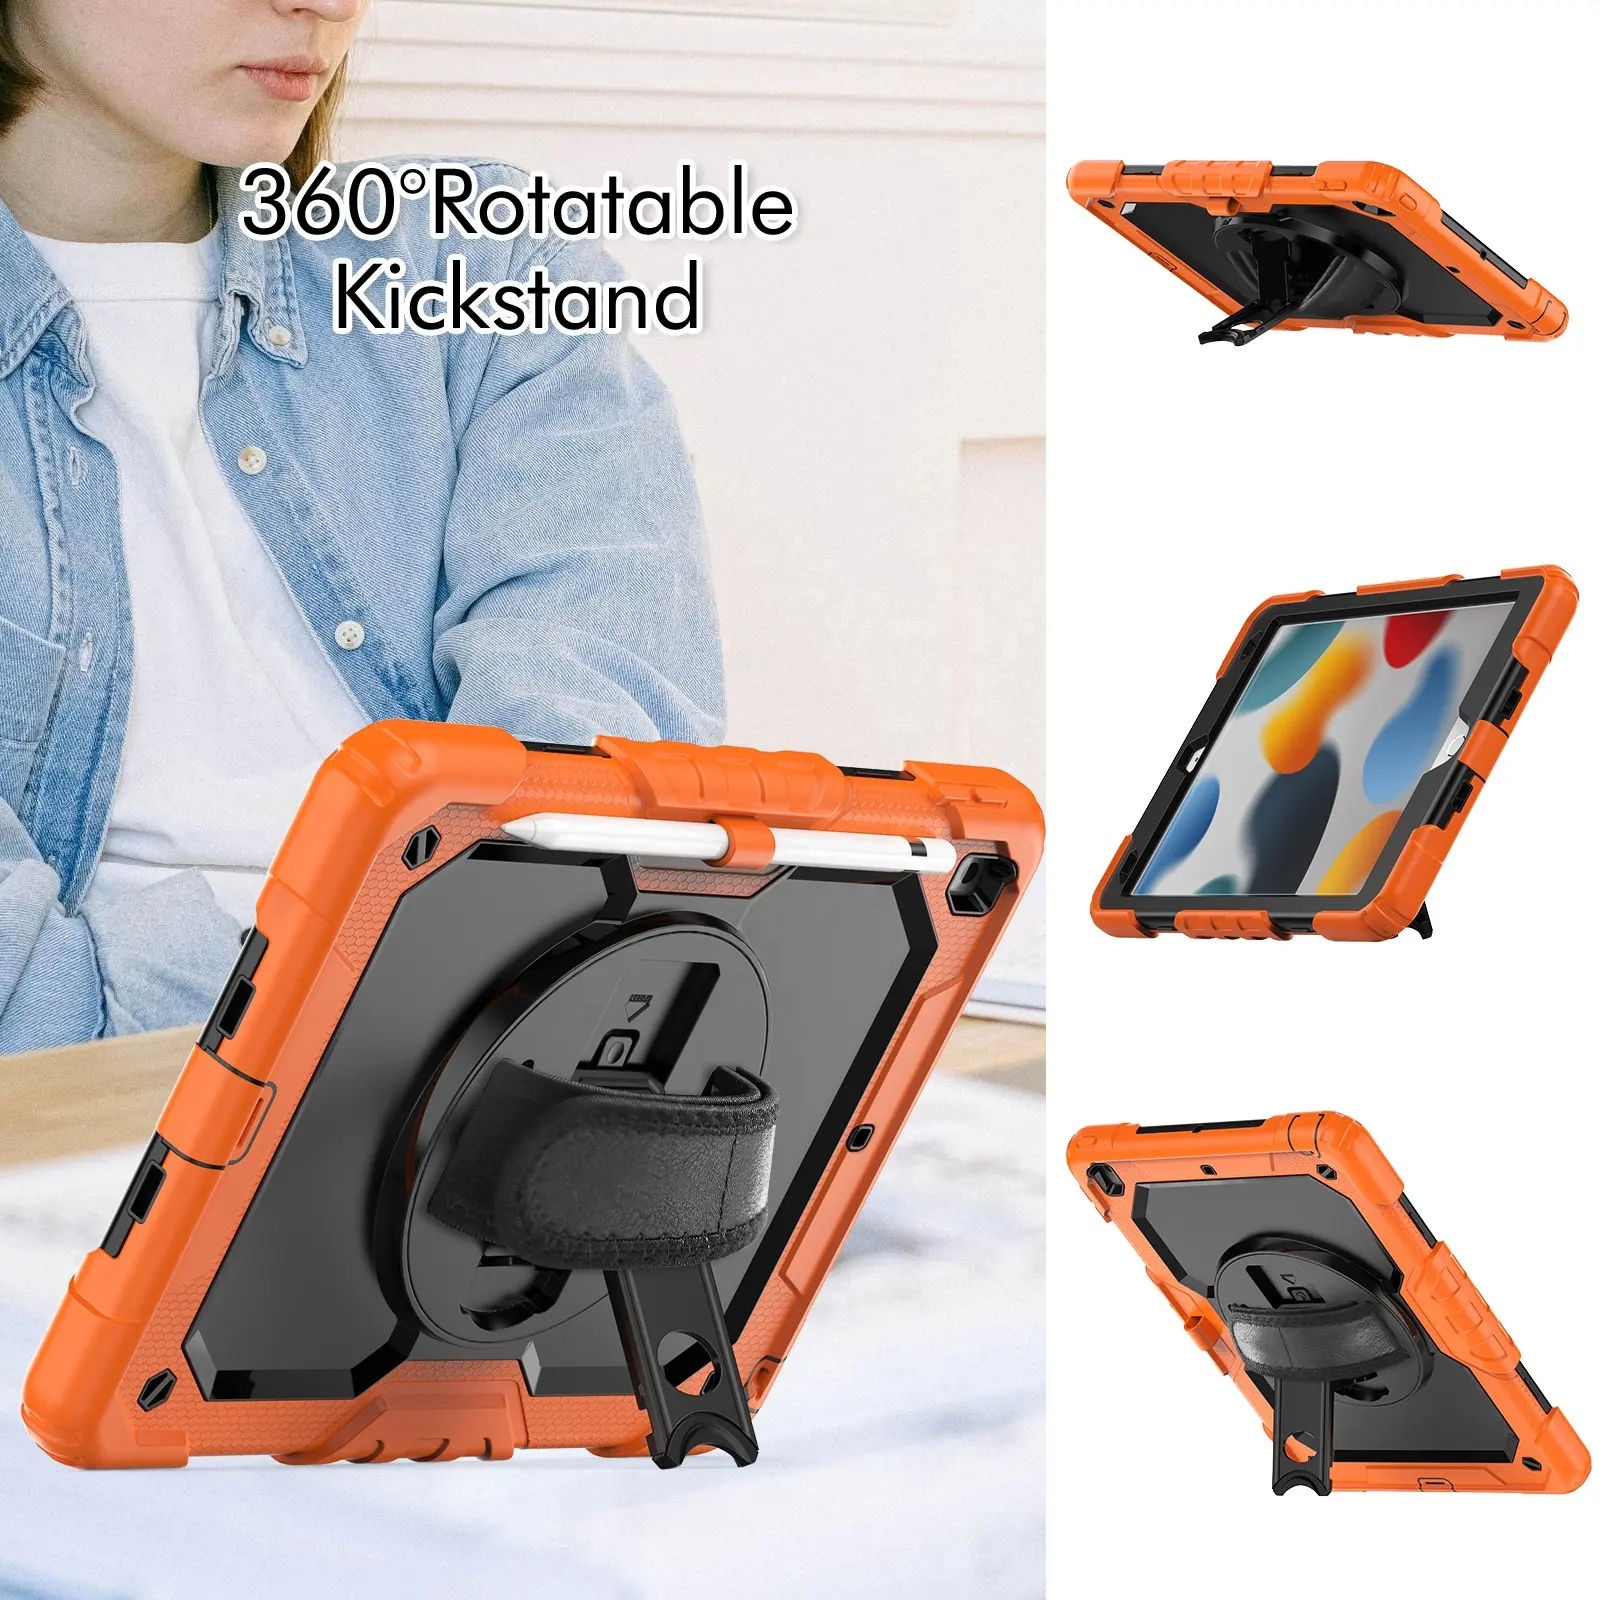 Silicone PC tablet case for ipad 9th Generation 10.2 inch case with built in rotation kickstand